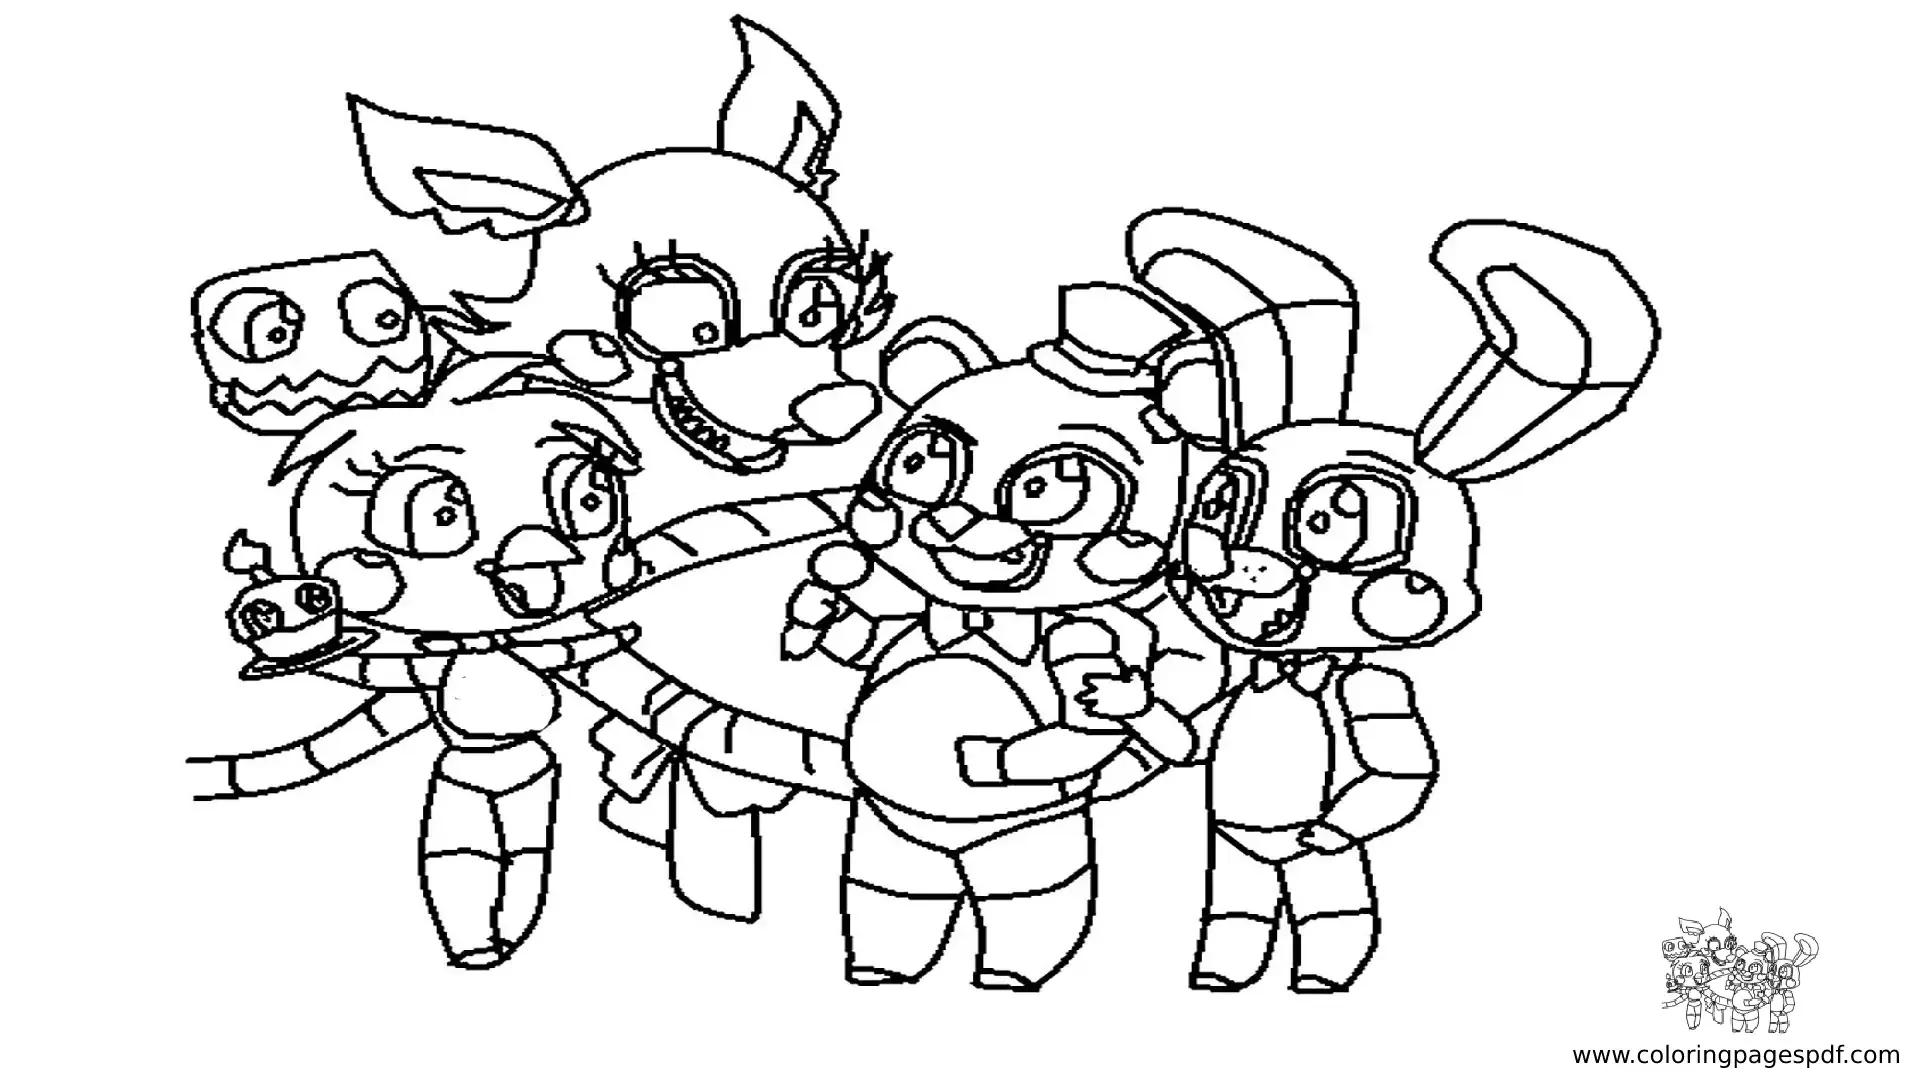 Coloring Pages Of FNAF Cute Characters